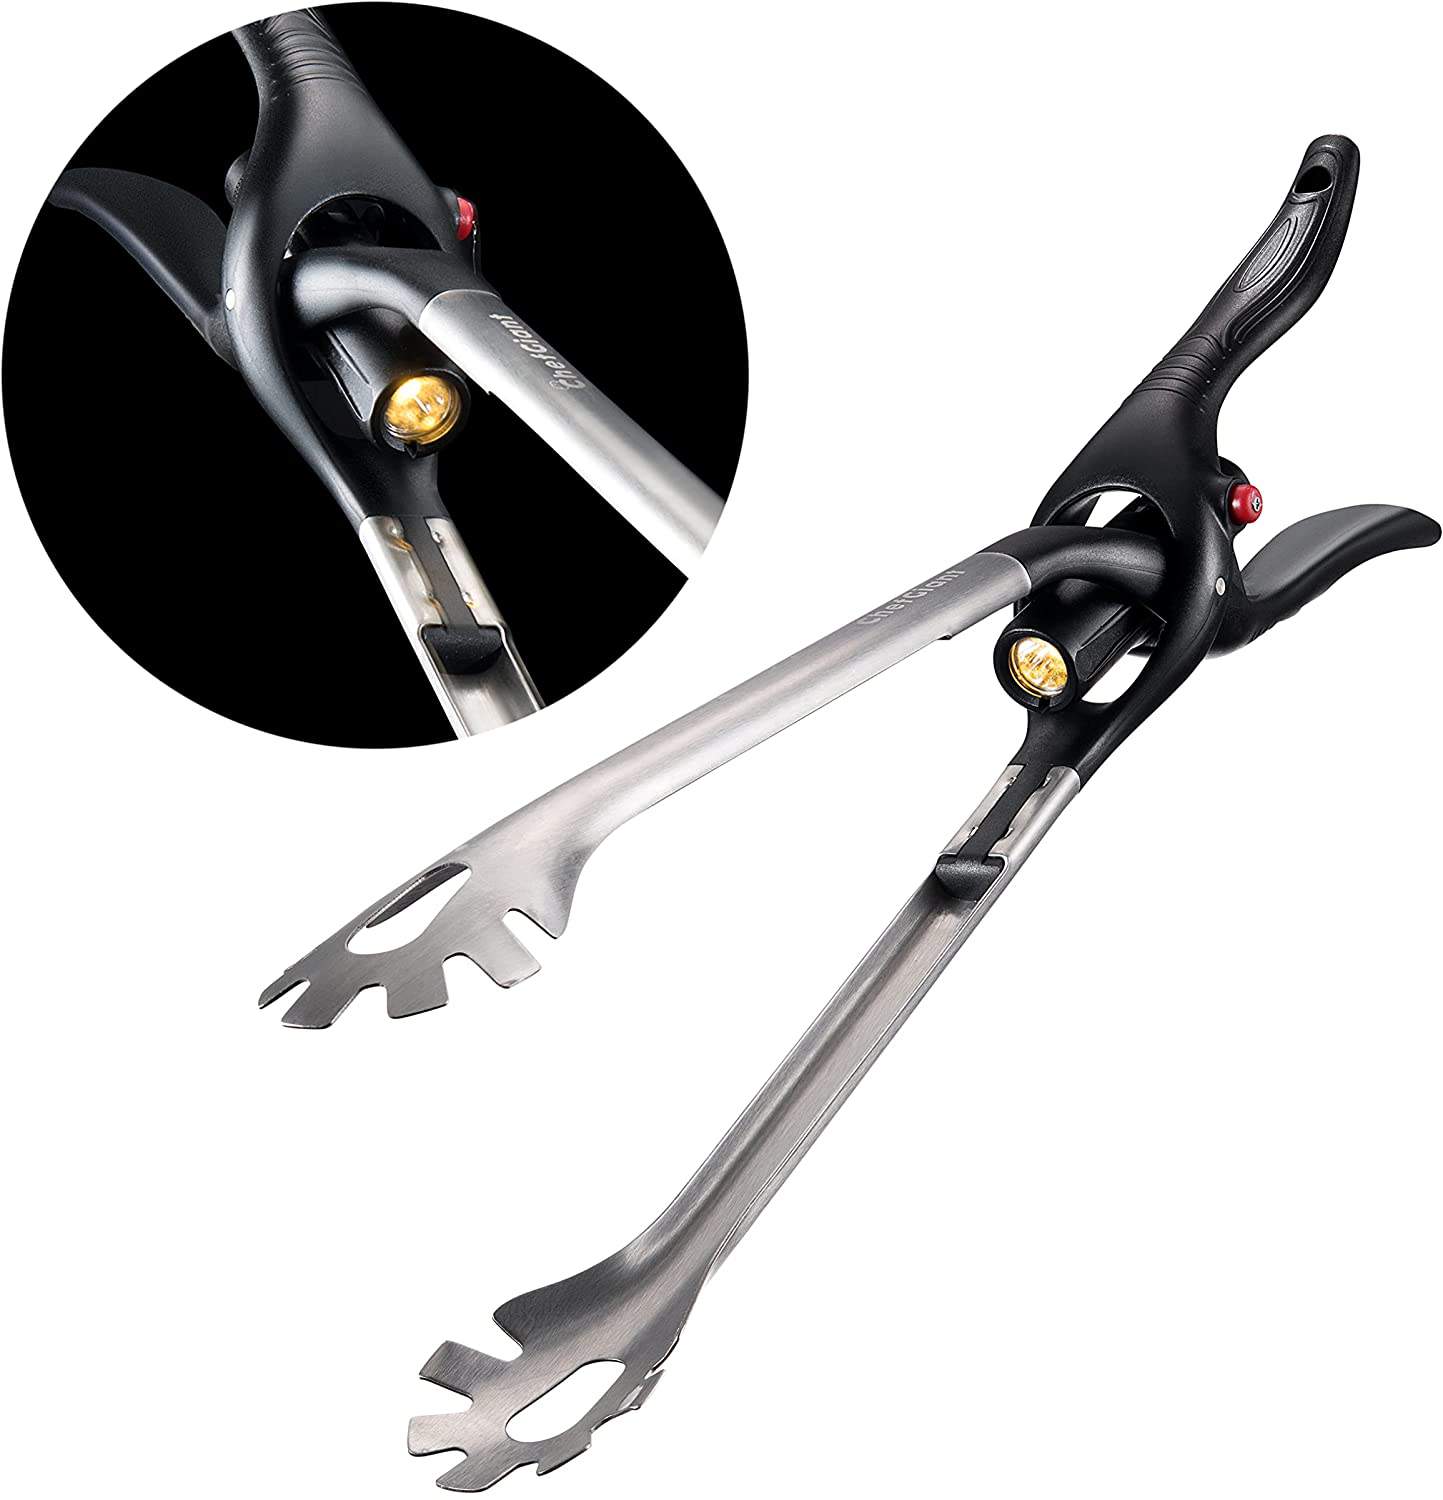 Best grill tongs with LED light- ChefGiant with LED Flashlight